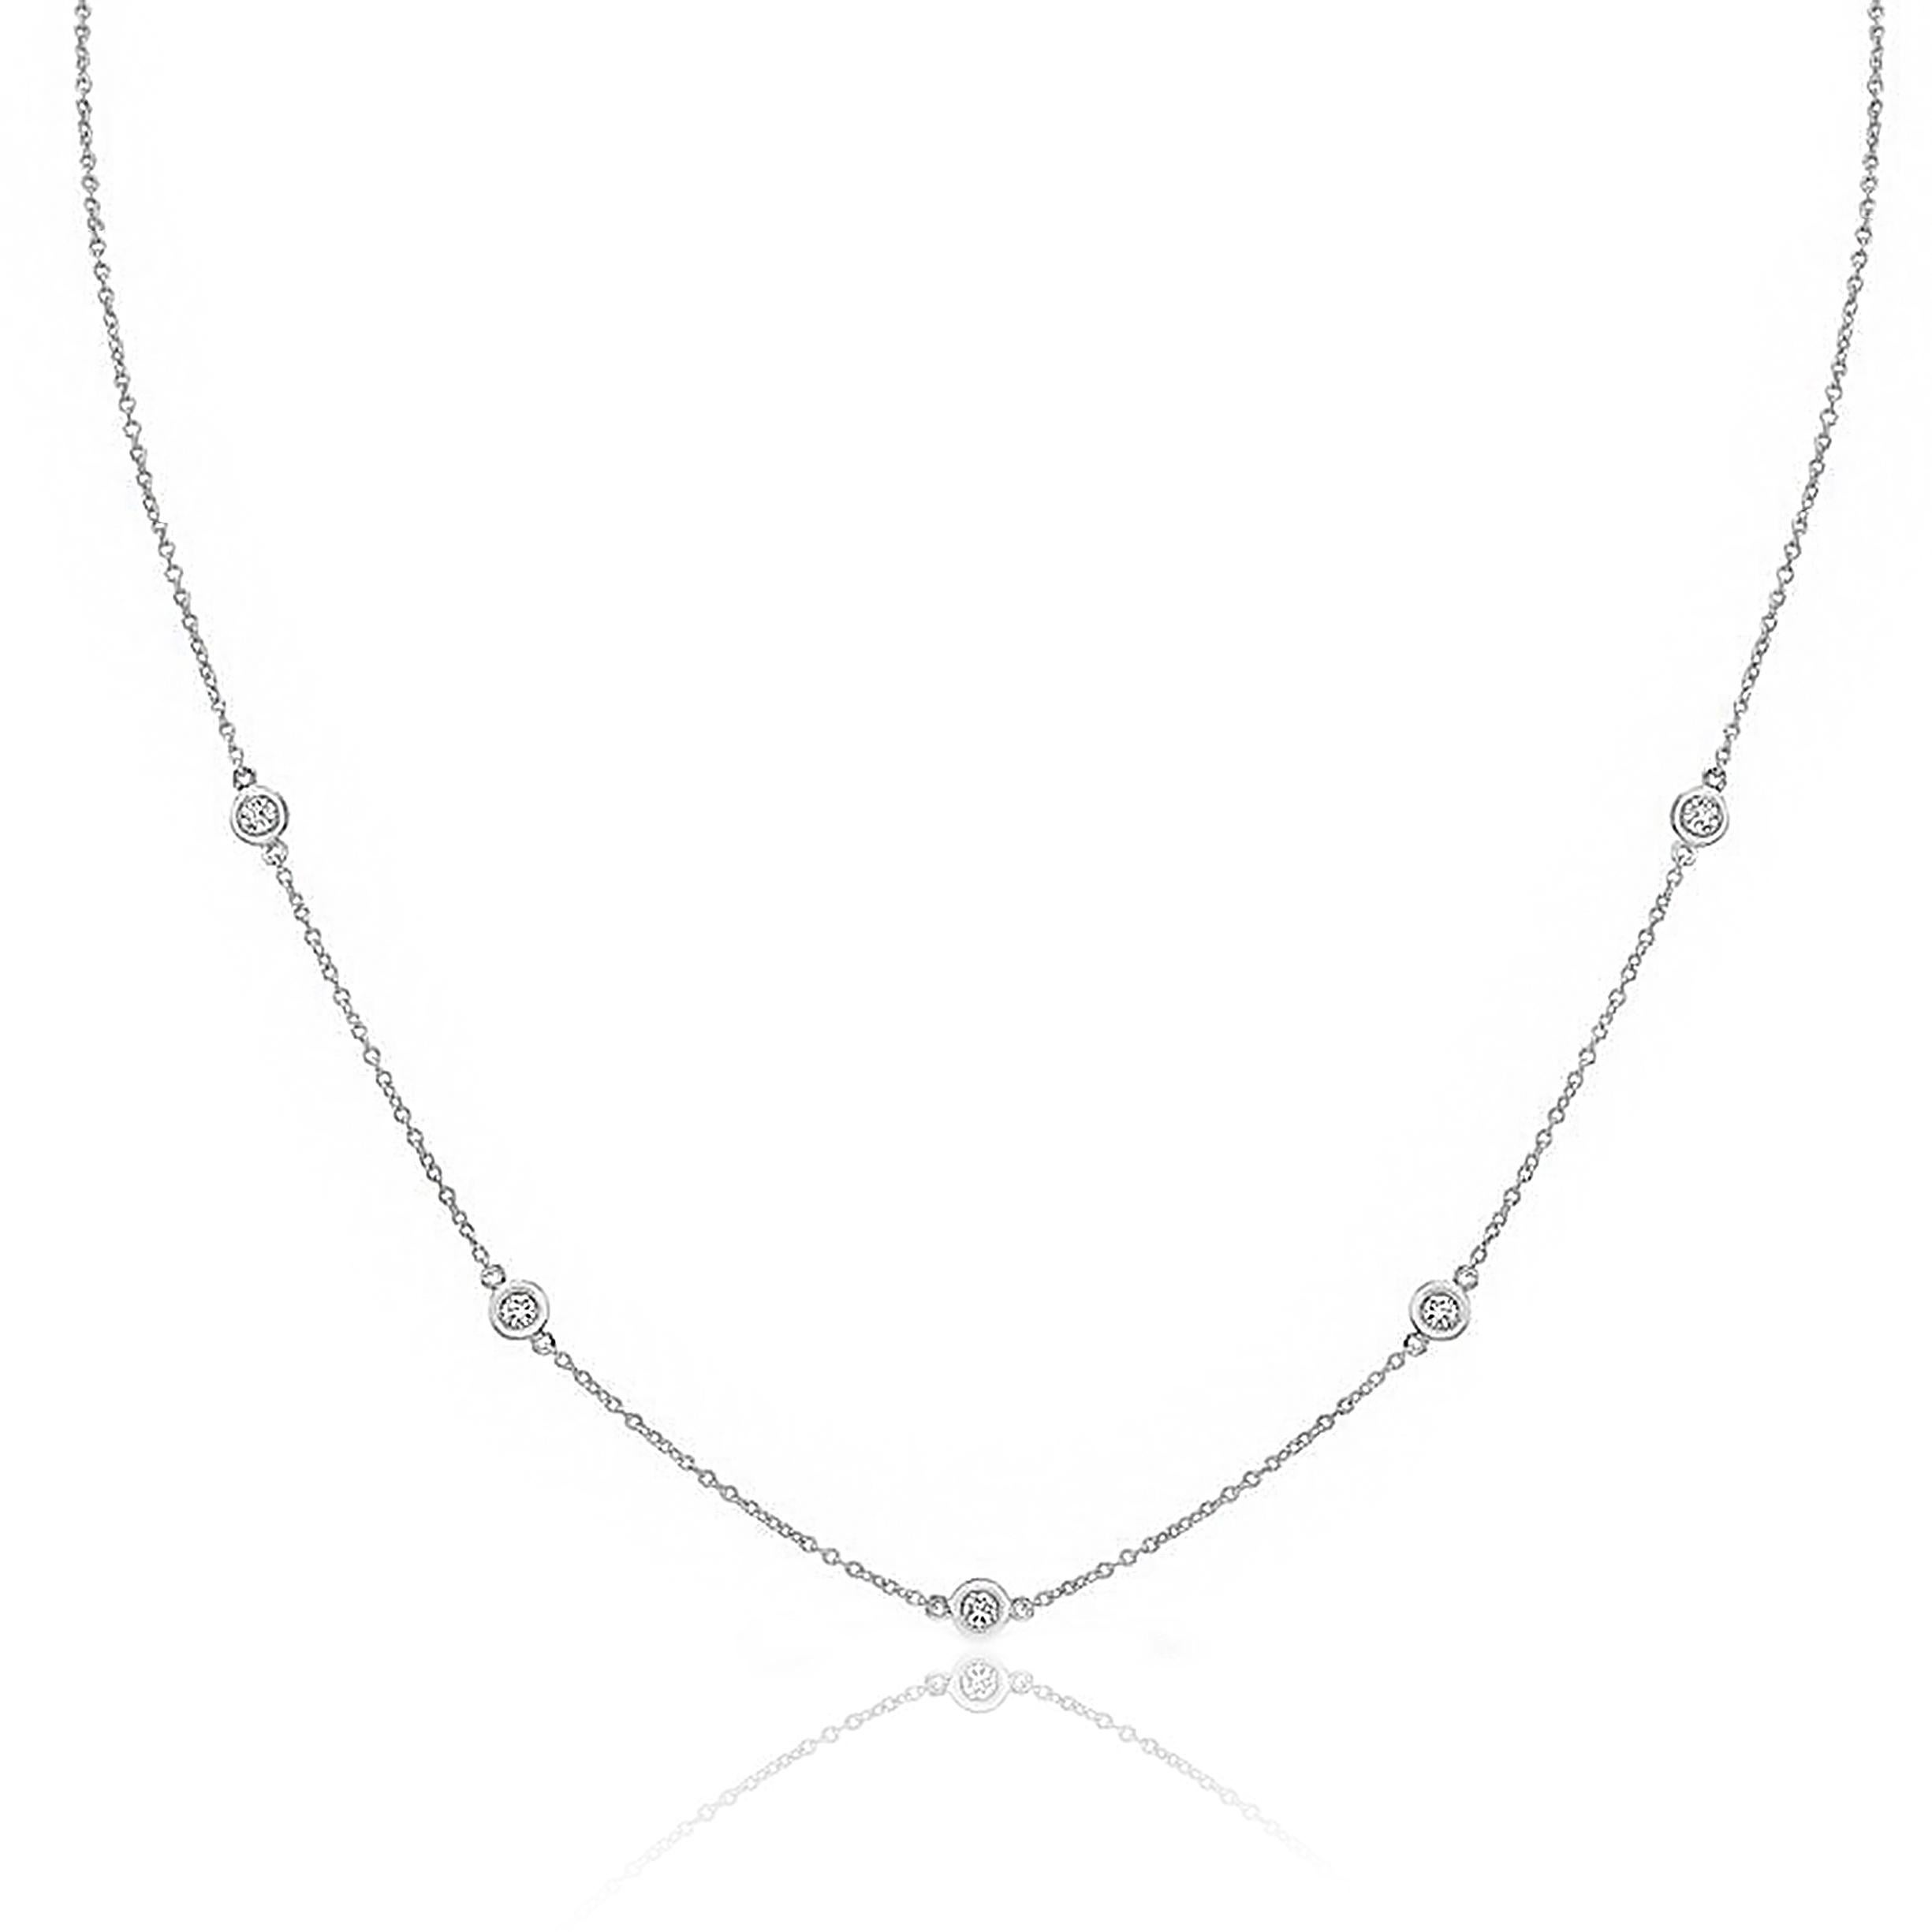 Modern 0.25 Carat Diamond by the Yard Chain Necklace in 14K White Gold For Sale